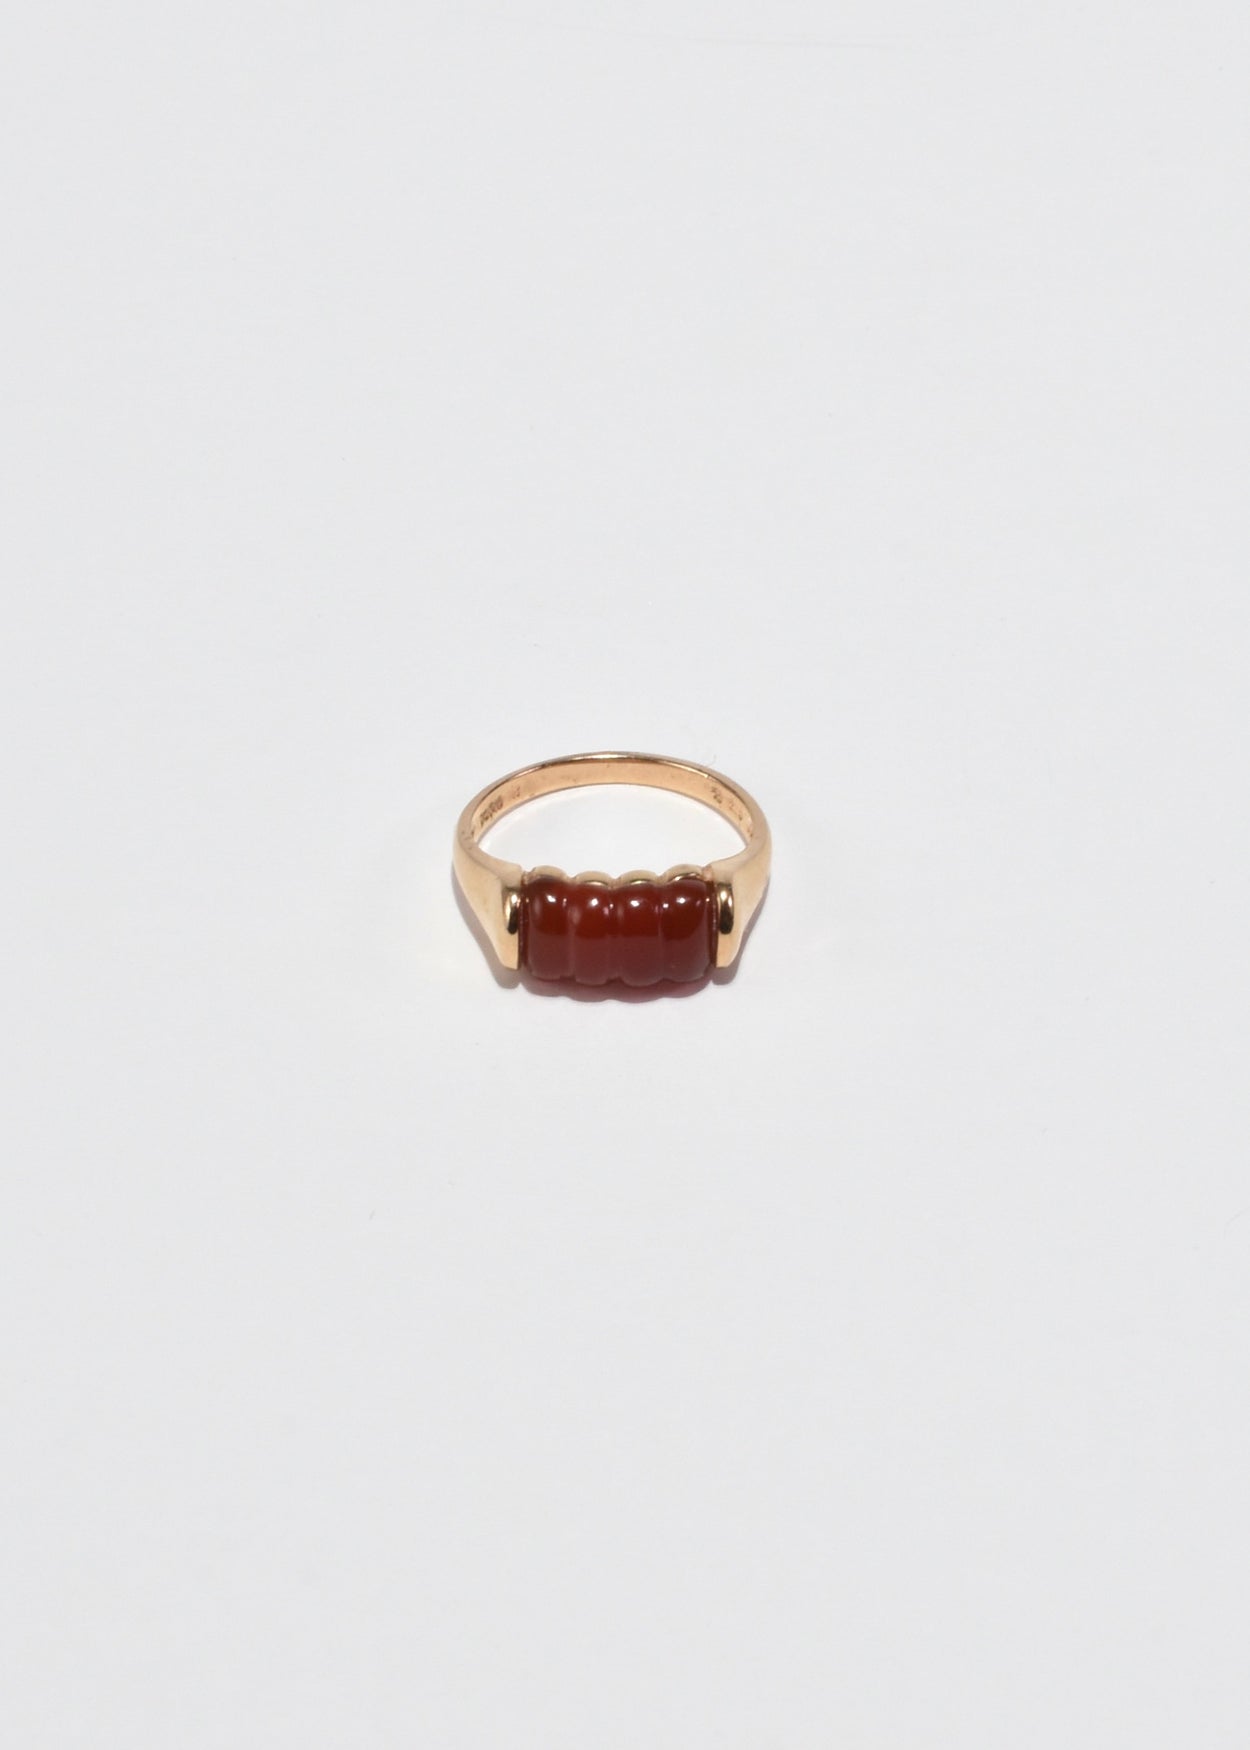 Carved Carnelian Ring